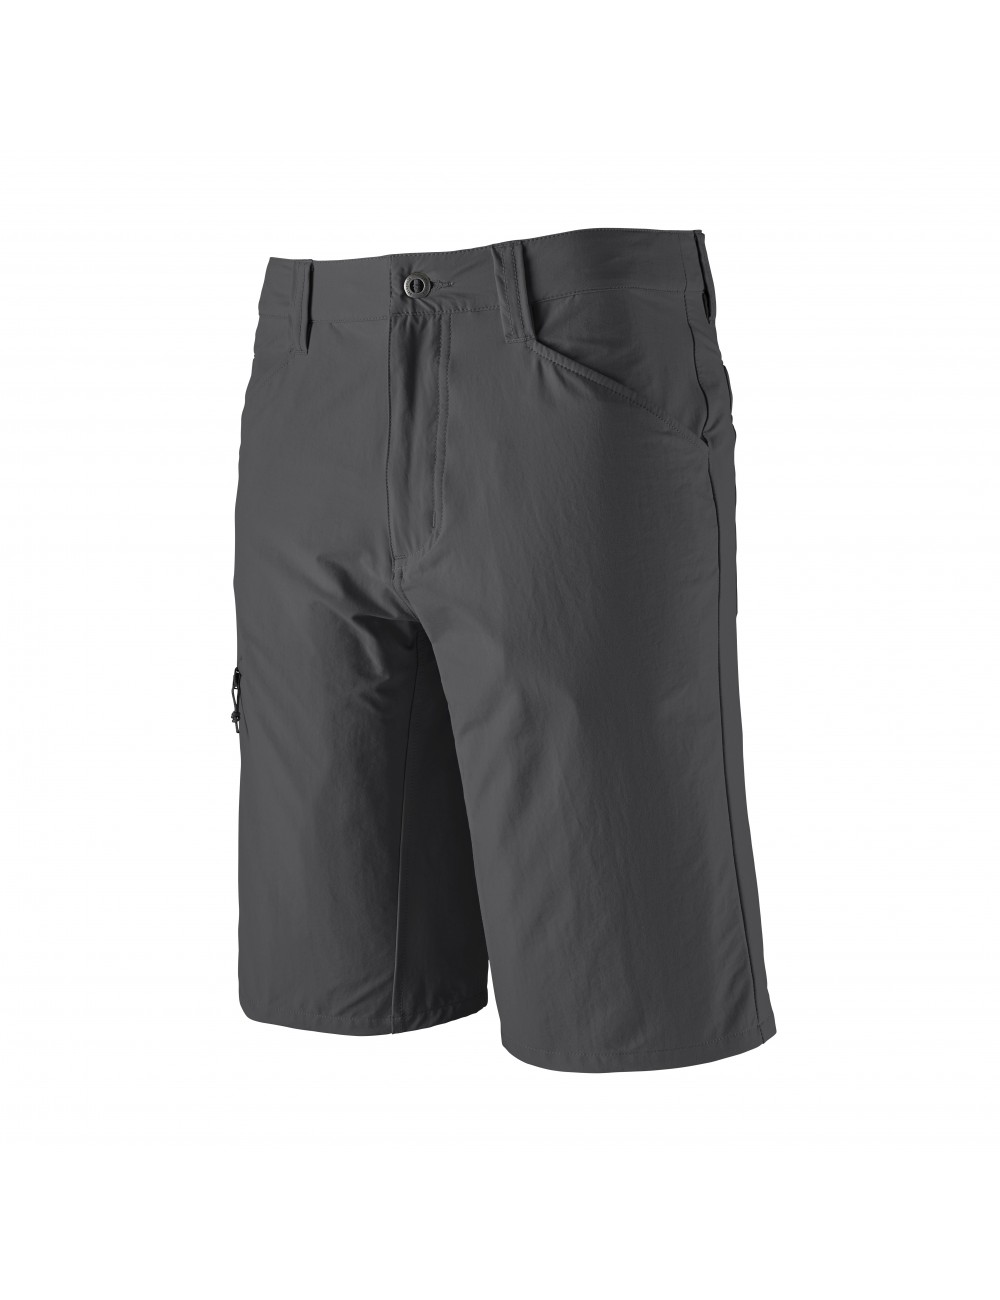 Patagonia Quandary Shorts 12 in. - Forge Grey